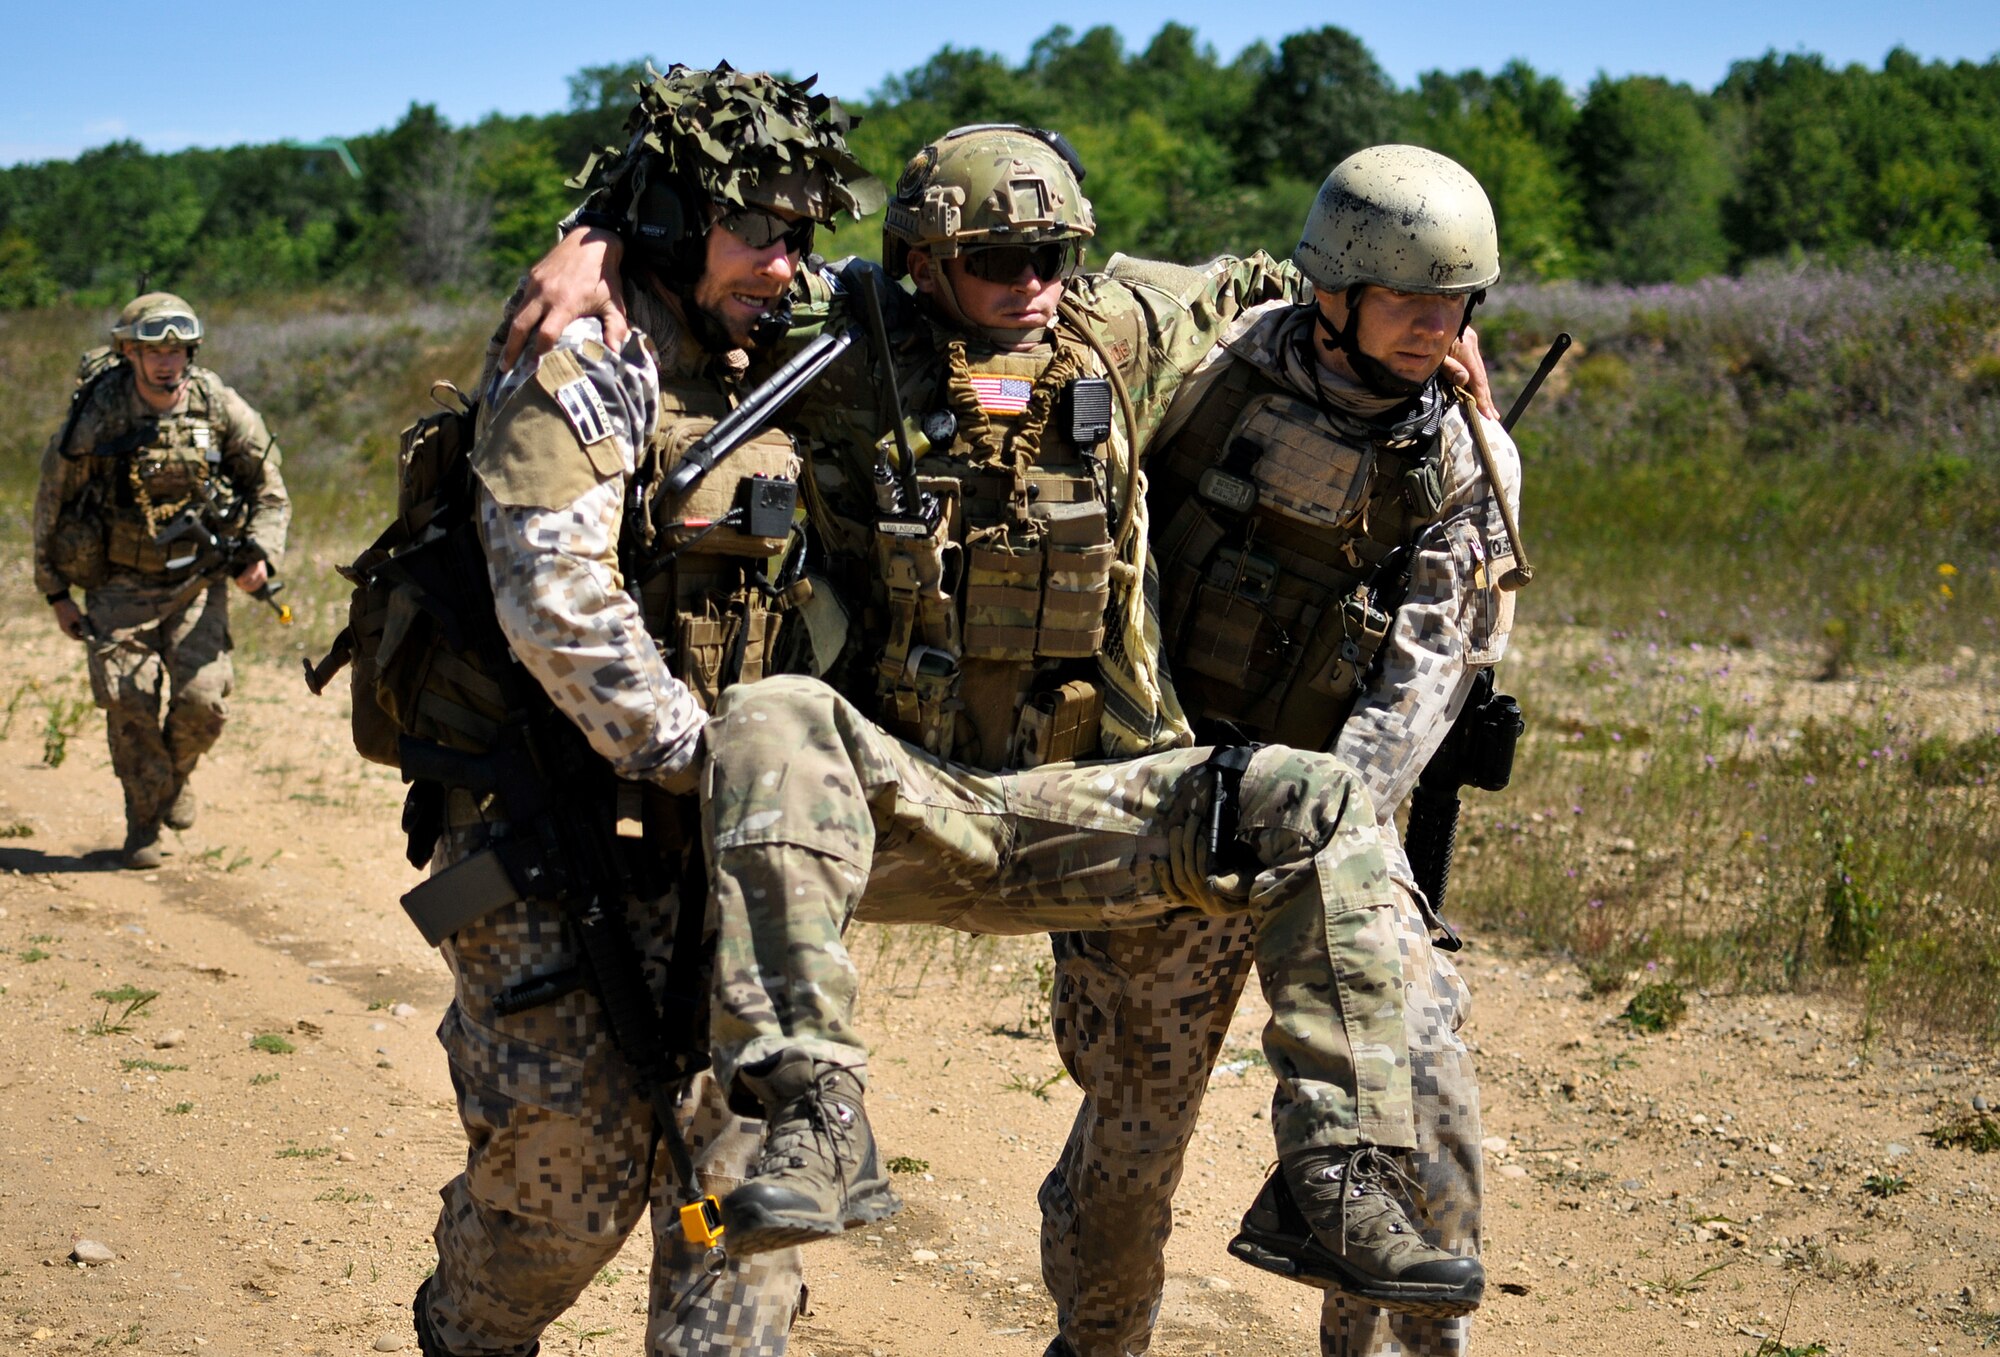 Latvian Capt. Armands Rutkis (left) and Cpl. Janis Gabranis (right), both tactical air control party specialists with the Latvian National Armed Forces, carry U.S. Air Force Senior Airman Lance A. Liggett to a medical evacuation point after a simulated roadside bomb explosion at Operation Northern Strike in Grayling Air Gunnery Range, Grayling, Mich., Aug. 14, 2014. Northern Strike was a 3-week-long exercise led by the National Guard that demonstrated the combined power of joint and multinational air and ground forces. TACPs with the Air National Guard’s 169th ASOS from Peoria, Ill., and more than 5,000 other armed forces members from 12 states and two coalition nations participated in the combat training. (U.S. Air National Guard photo by Staff Sgt. Lealan Buehrer/Released)